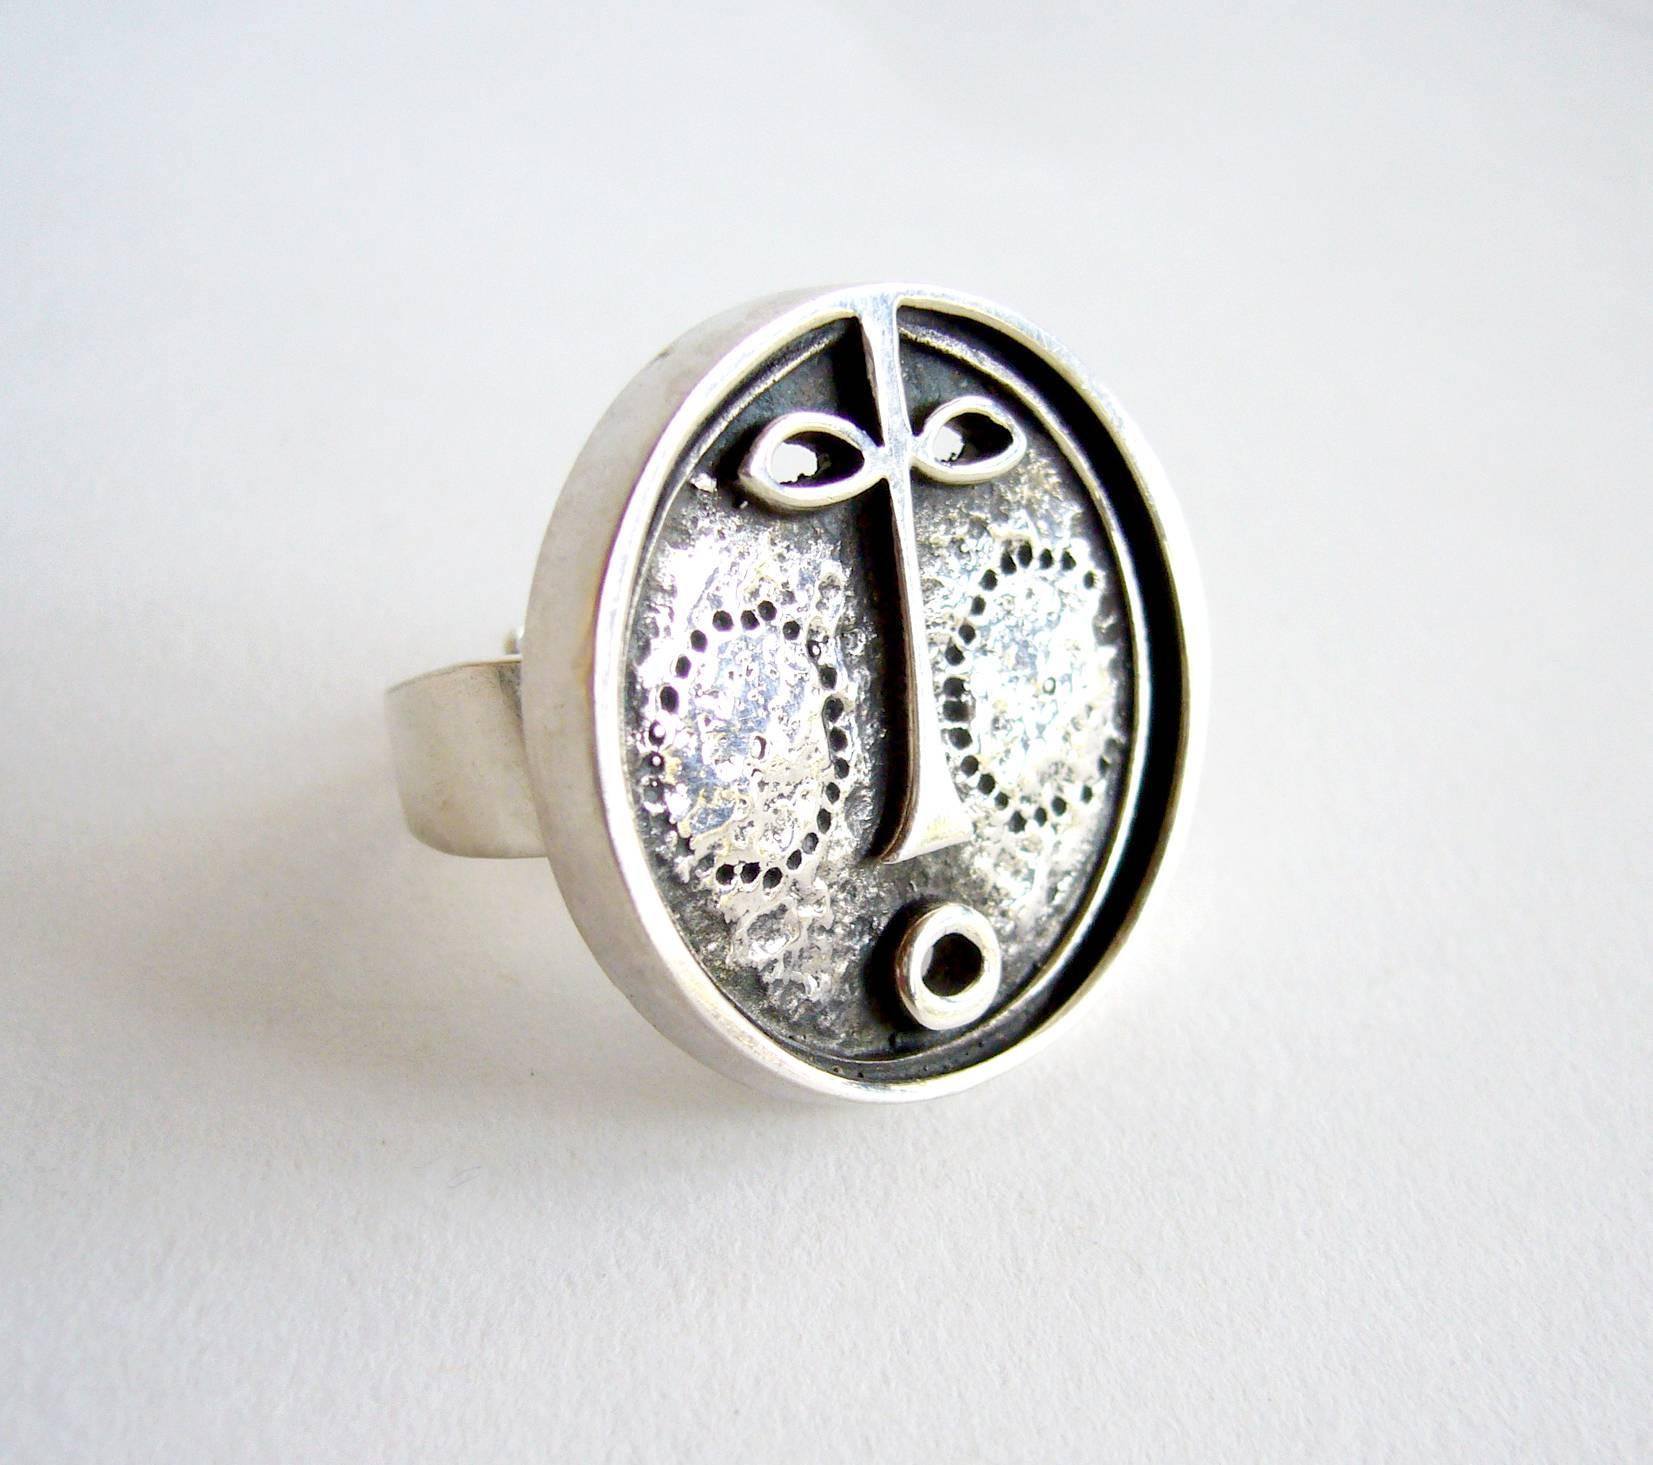 Stylized silver mask ring designed and created by Jorma Laine of Finland. Diameter of the face is about 1 1/4